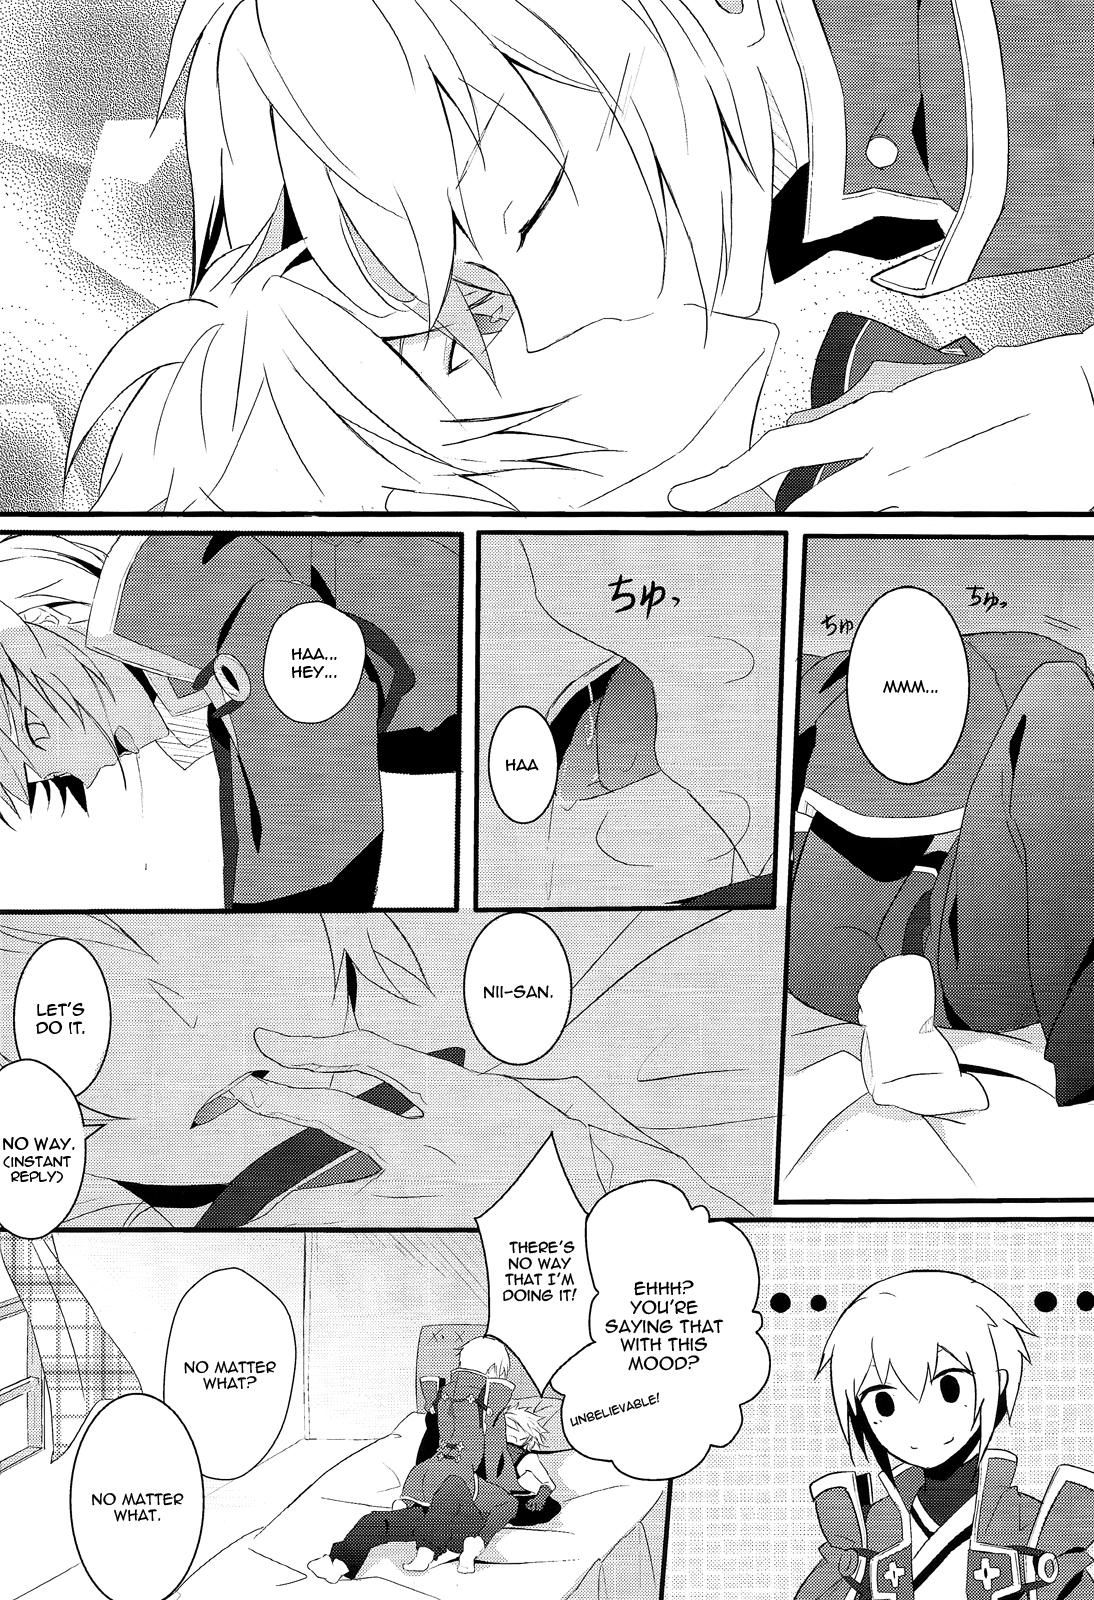 Soloboy Taking Back Time - Blazblue Colombian - Page 11